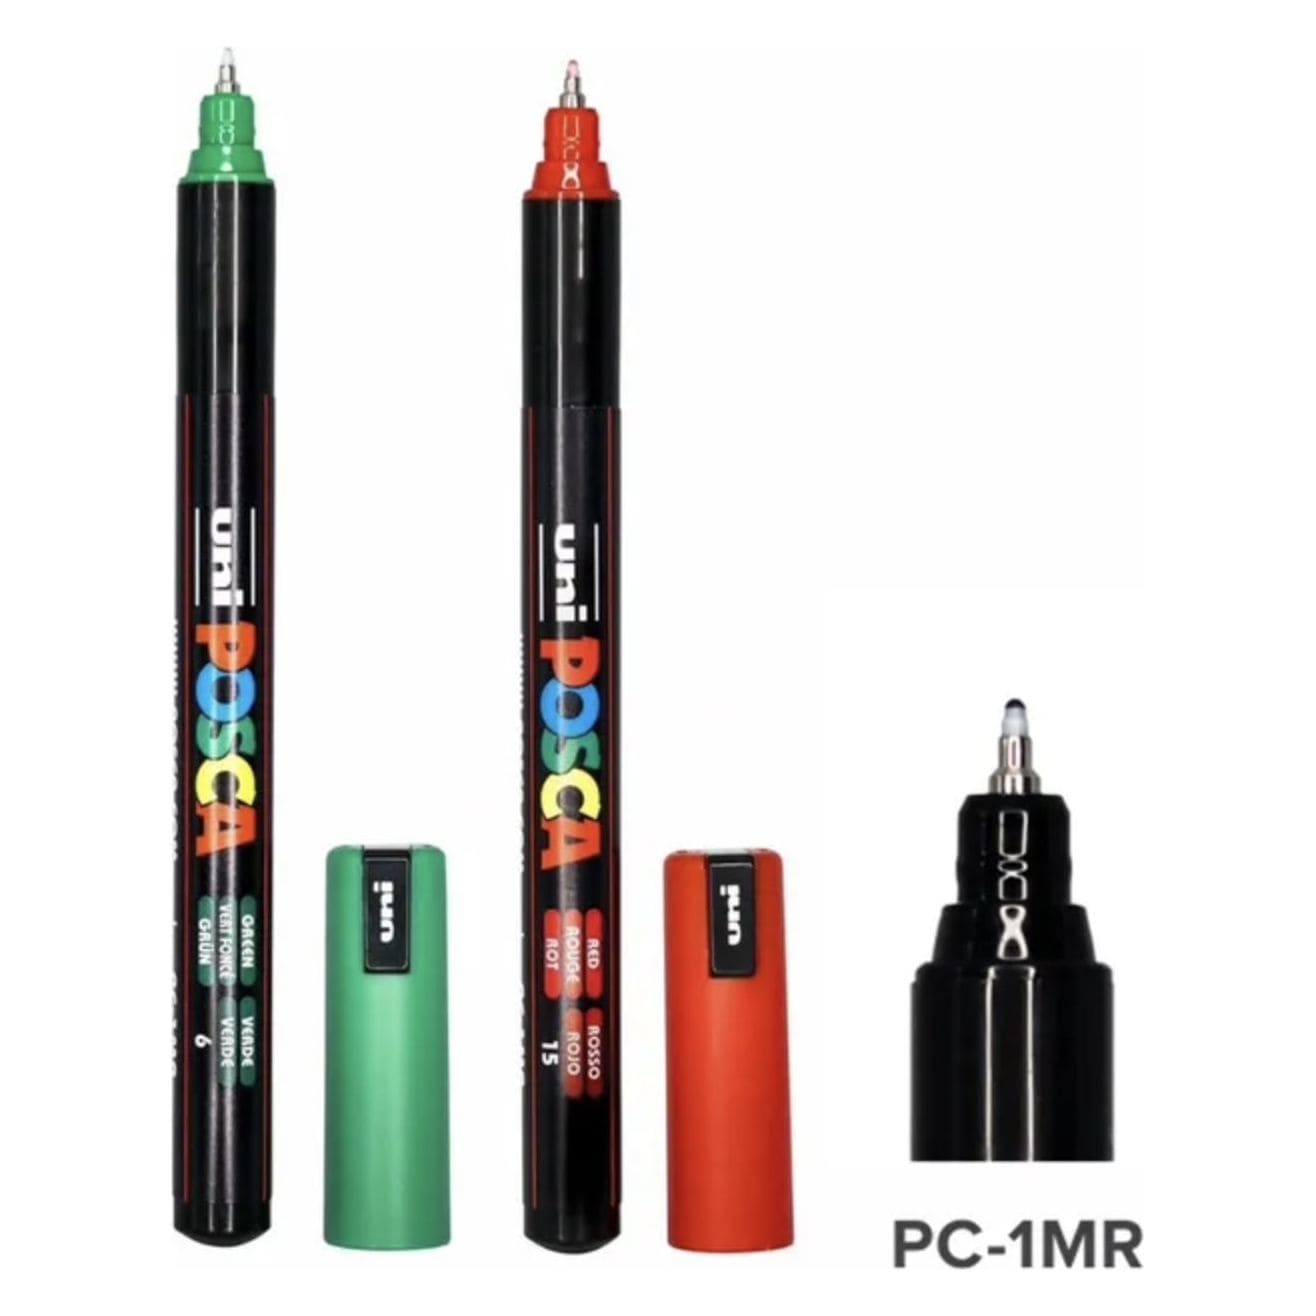  POSCA Paint Marker Pens PC-5M - 1.8-2.5mm Nib - Pack of 33  Colours : Arts, Crafts & Sewing